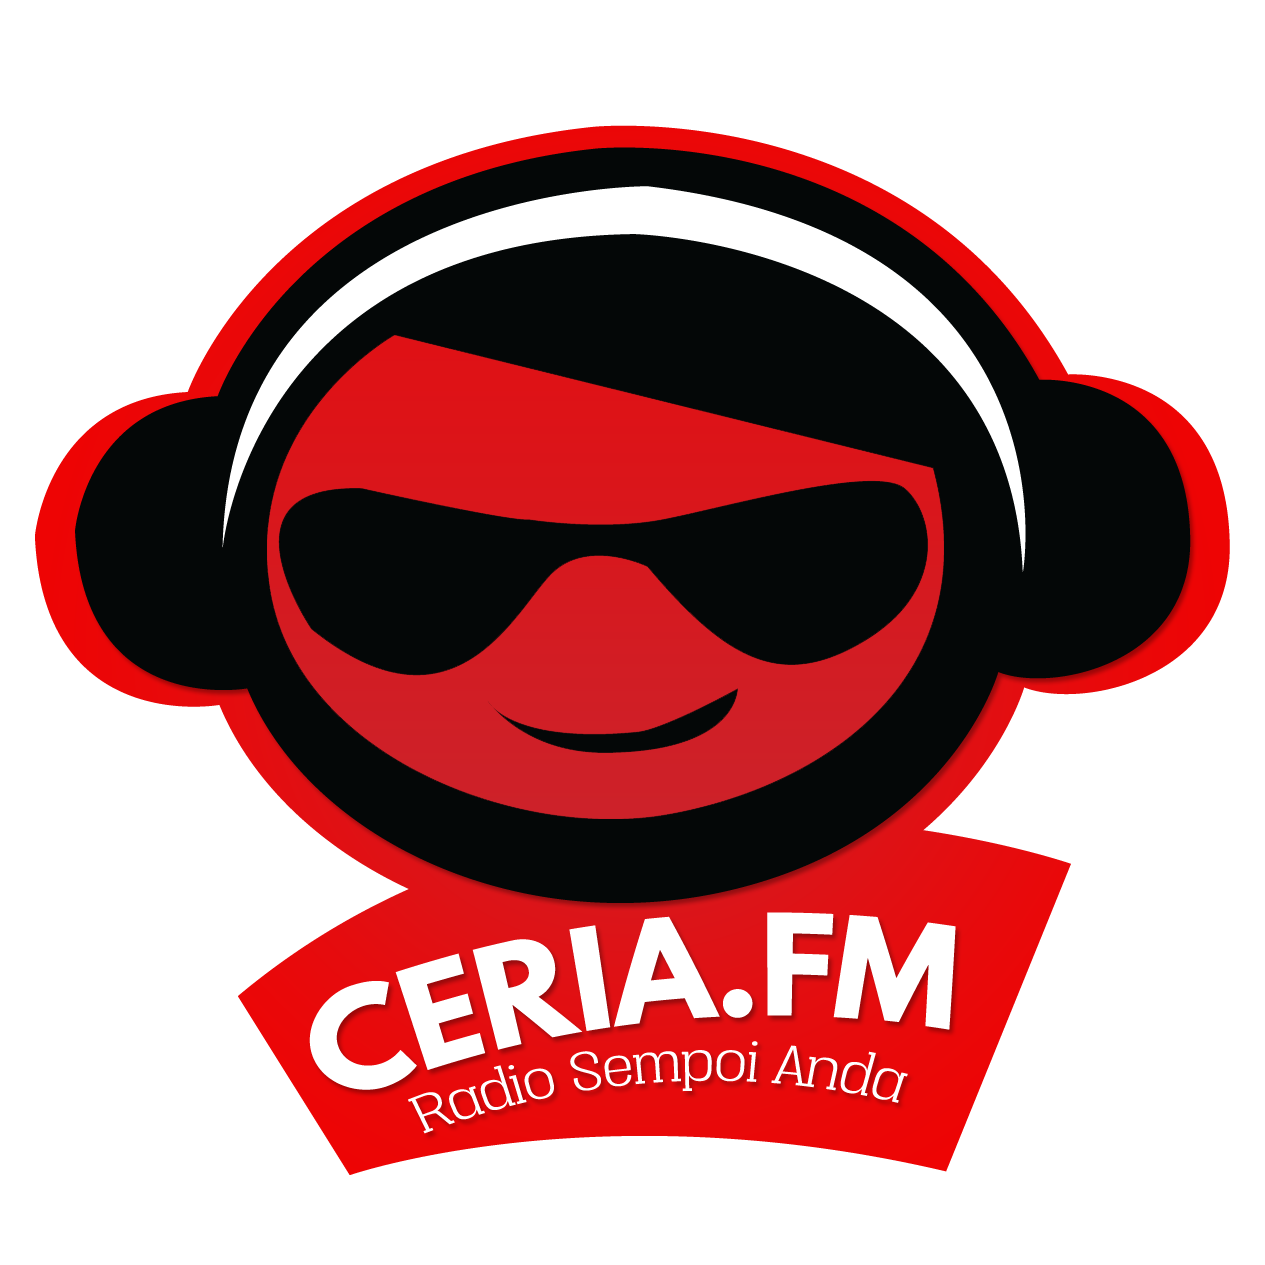 Ceria Fm is one of the famous live online radio stations broadcasting from ...